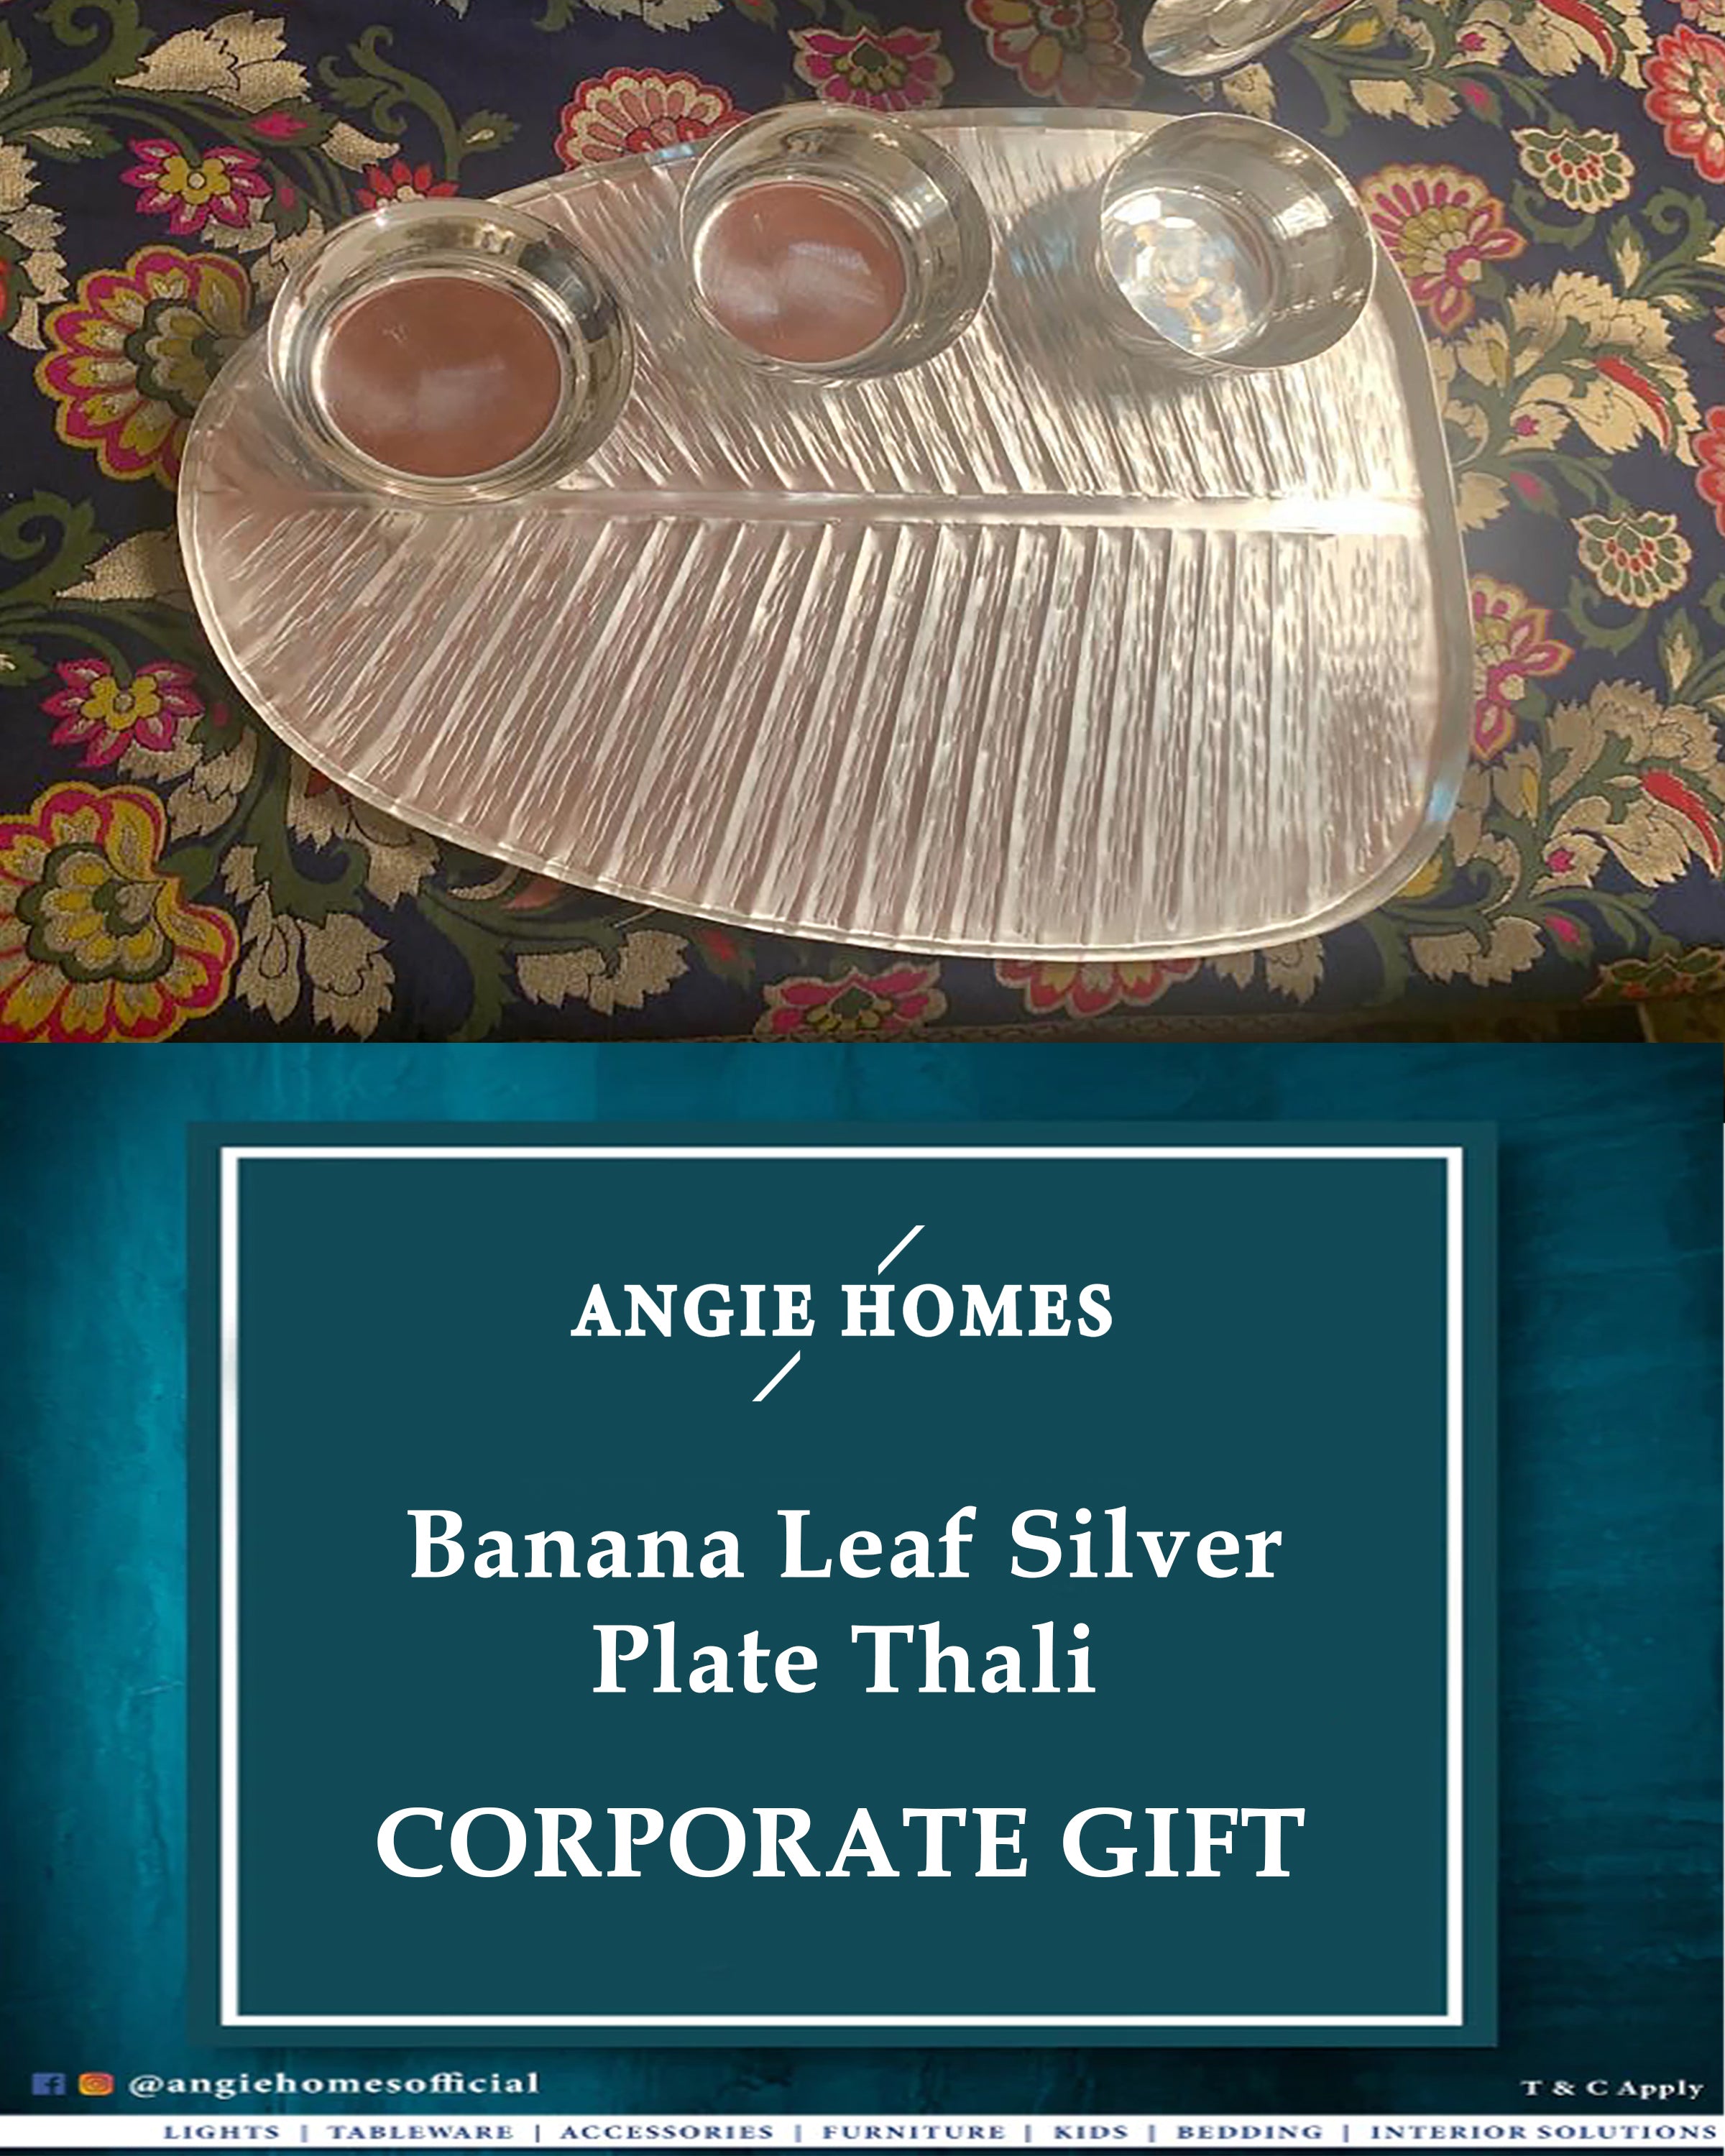 Banana Leaf Silver Plate for Wedding, House Warming & Corporate Gift ANGIE HOMES